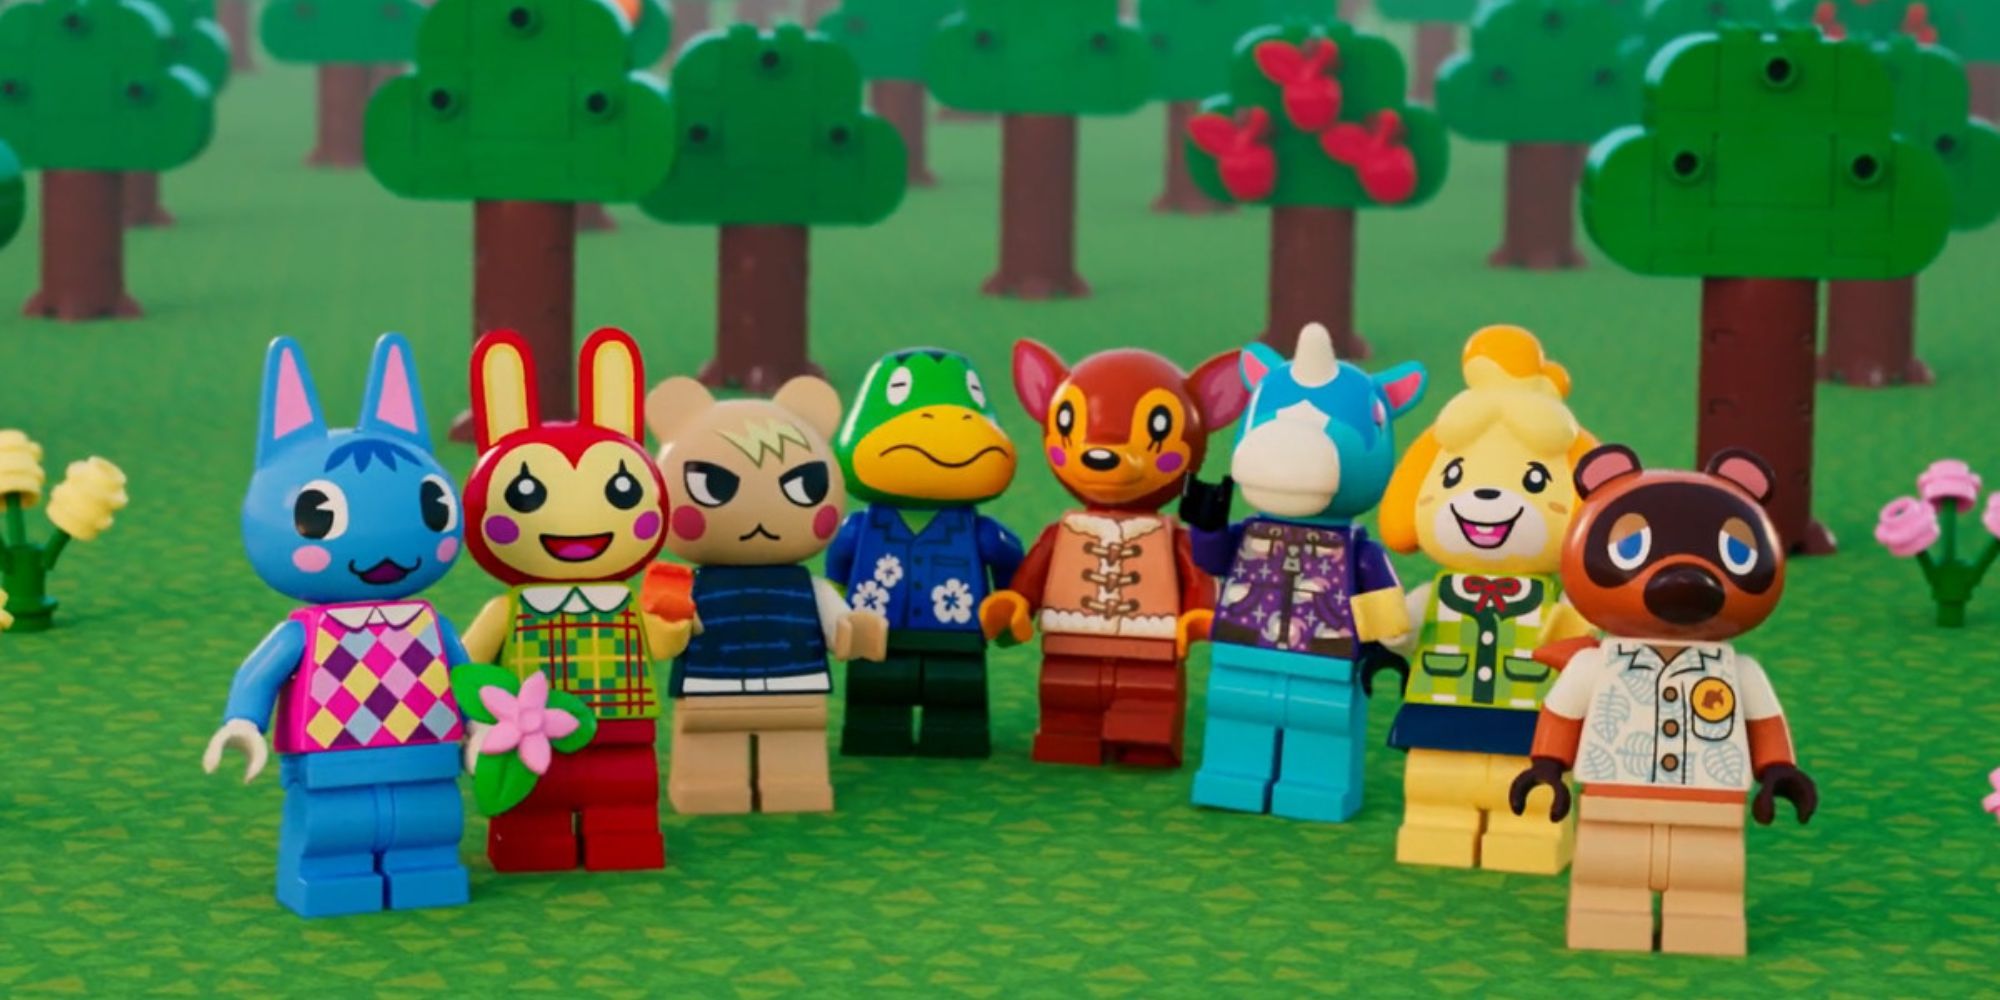 Lego Animal Crossing Set featuring characters such as Isabelle and Tom Nook